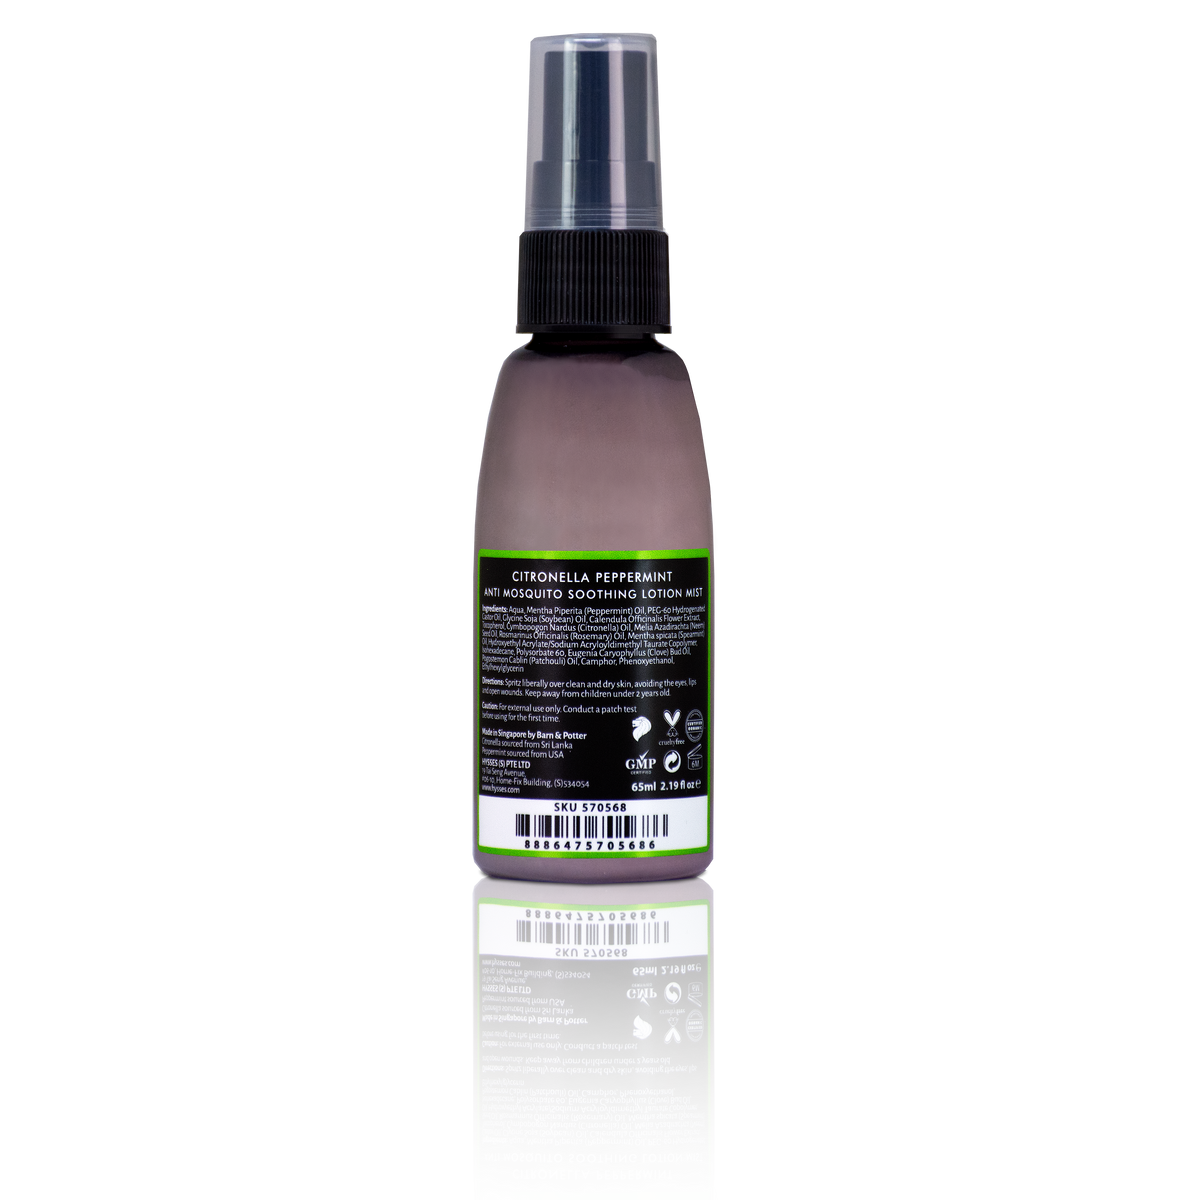 Anti Mosquito Soothing Lotion Mist